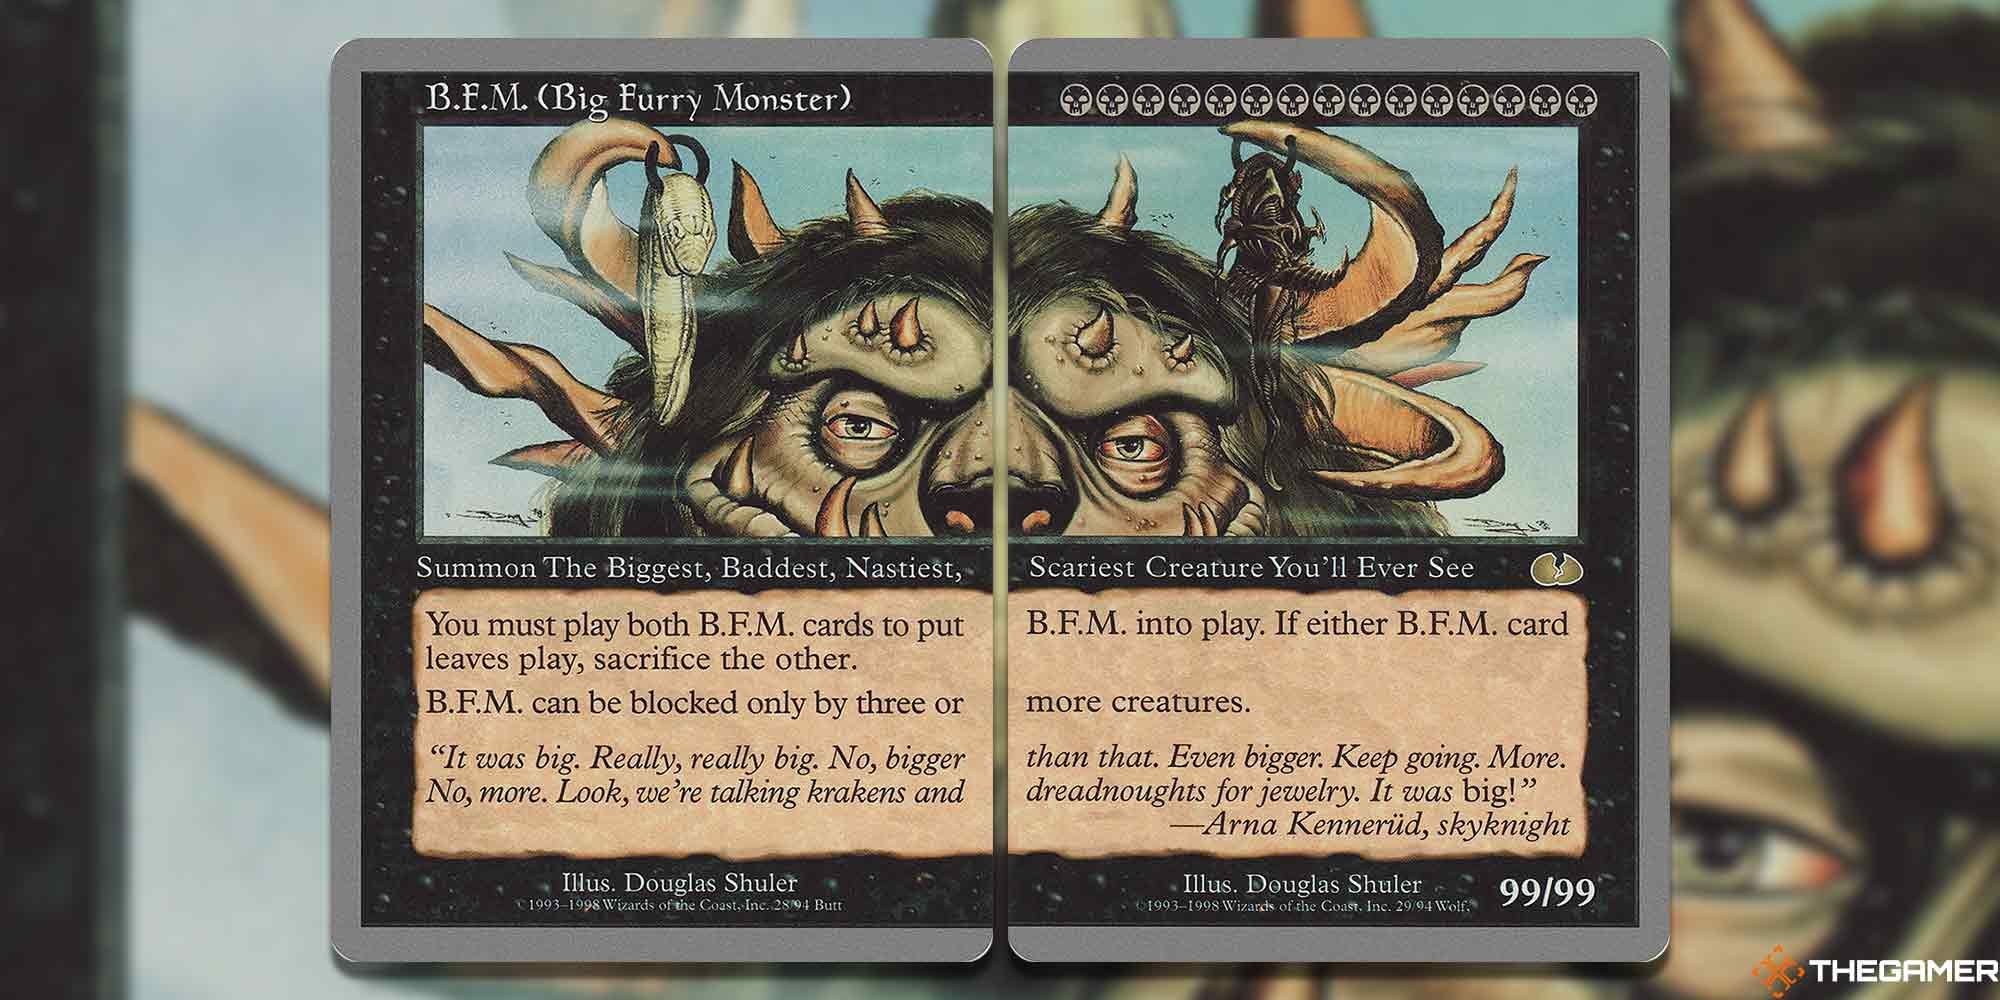 BFM (Big Furry Monster) cards from mtg